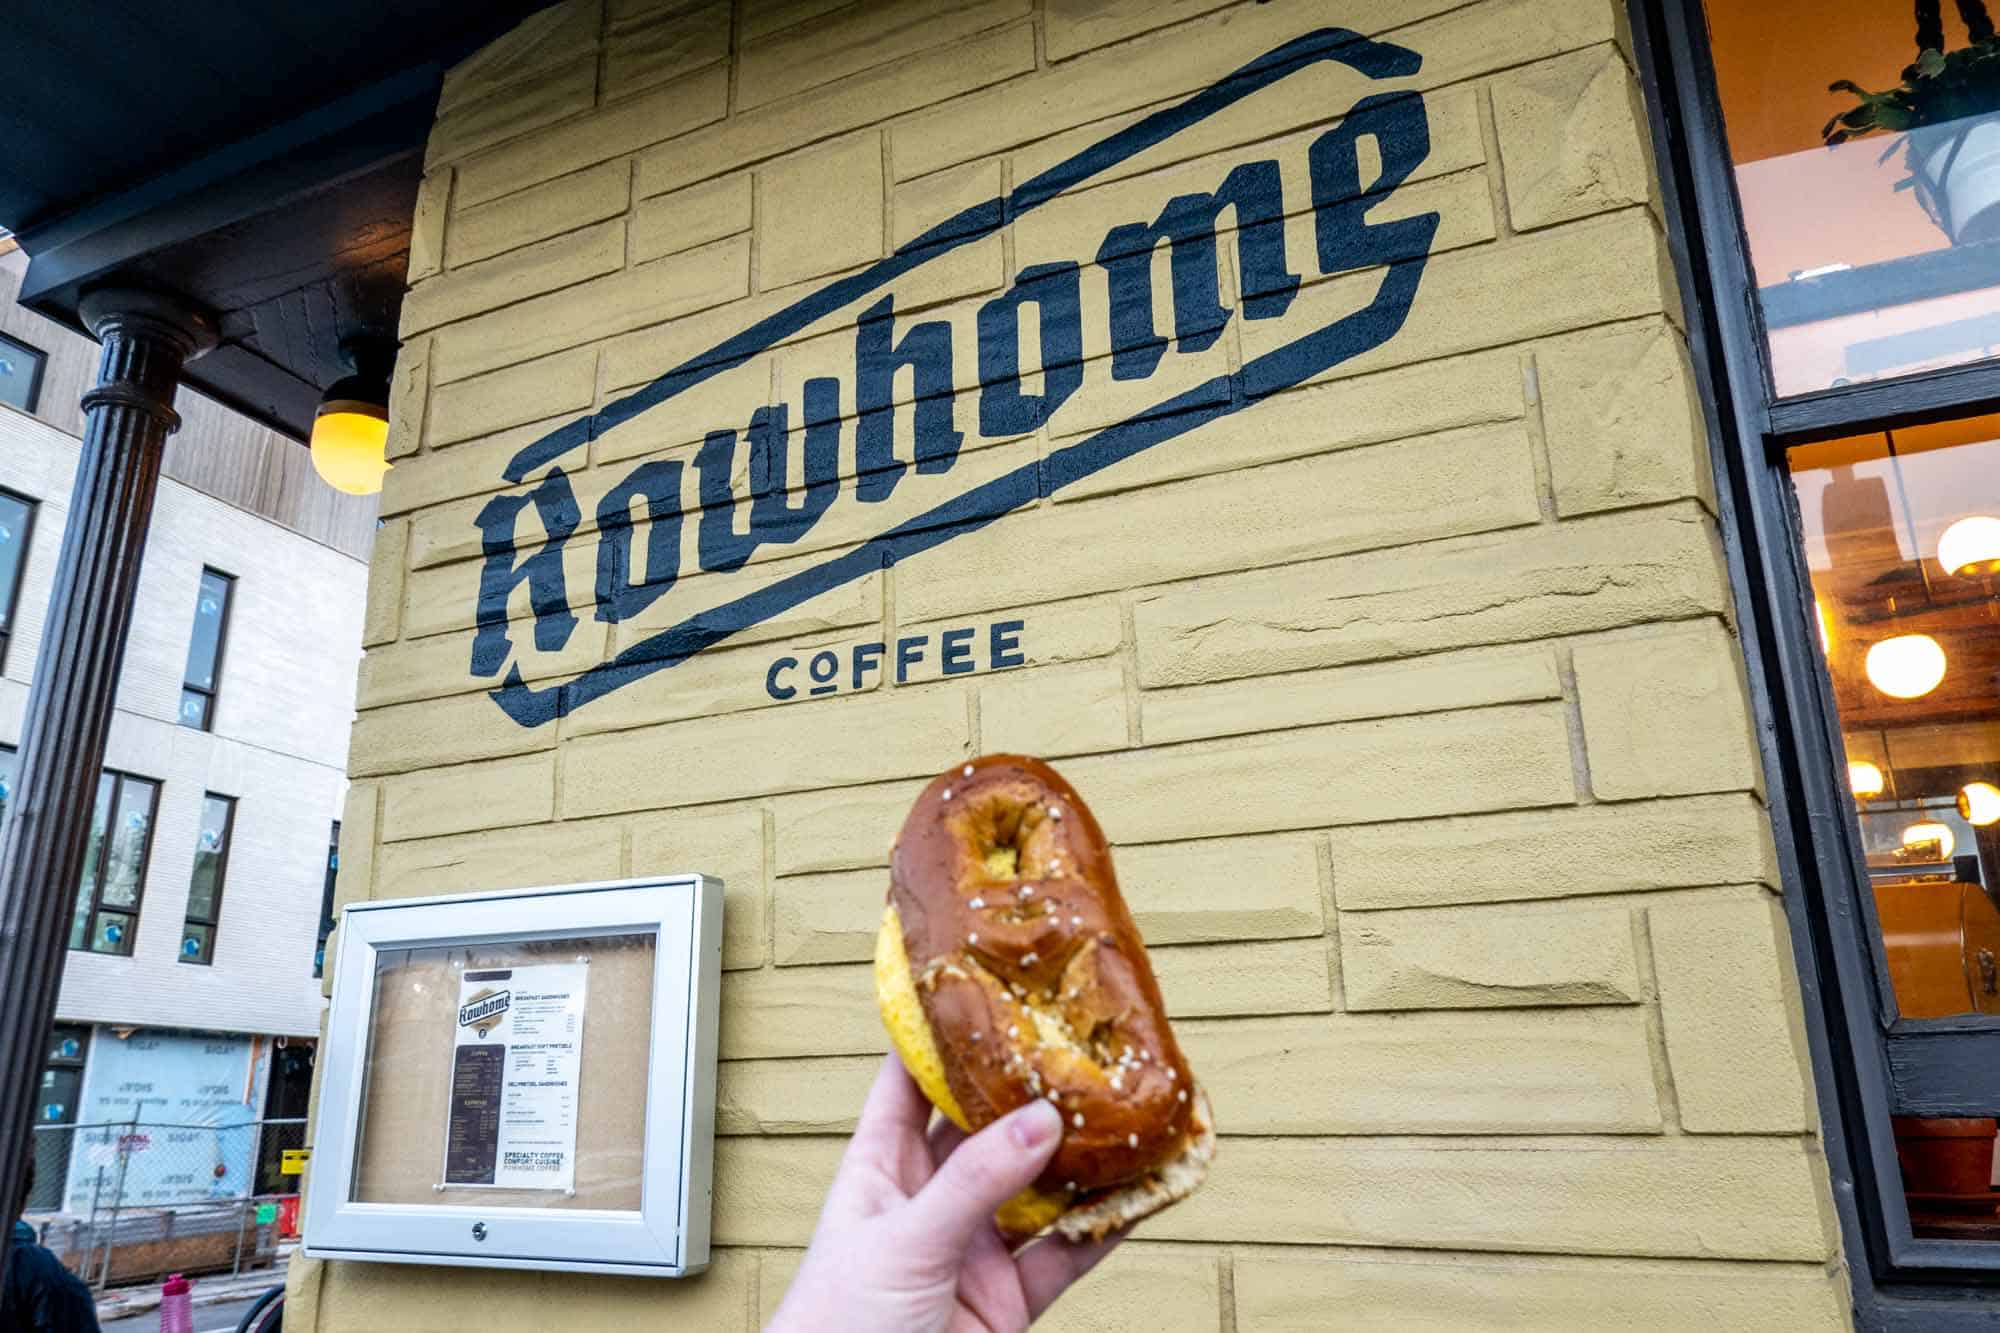 Hand holding a pretzel sandwich in front of a sign for "Rowhome Coffee"